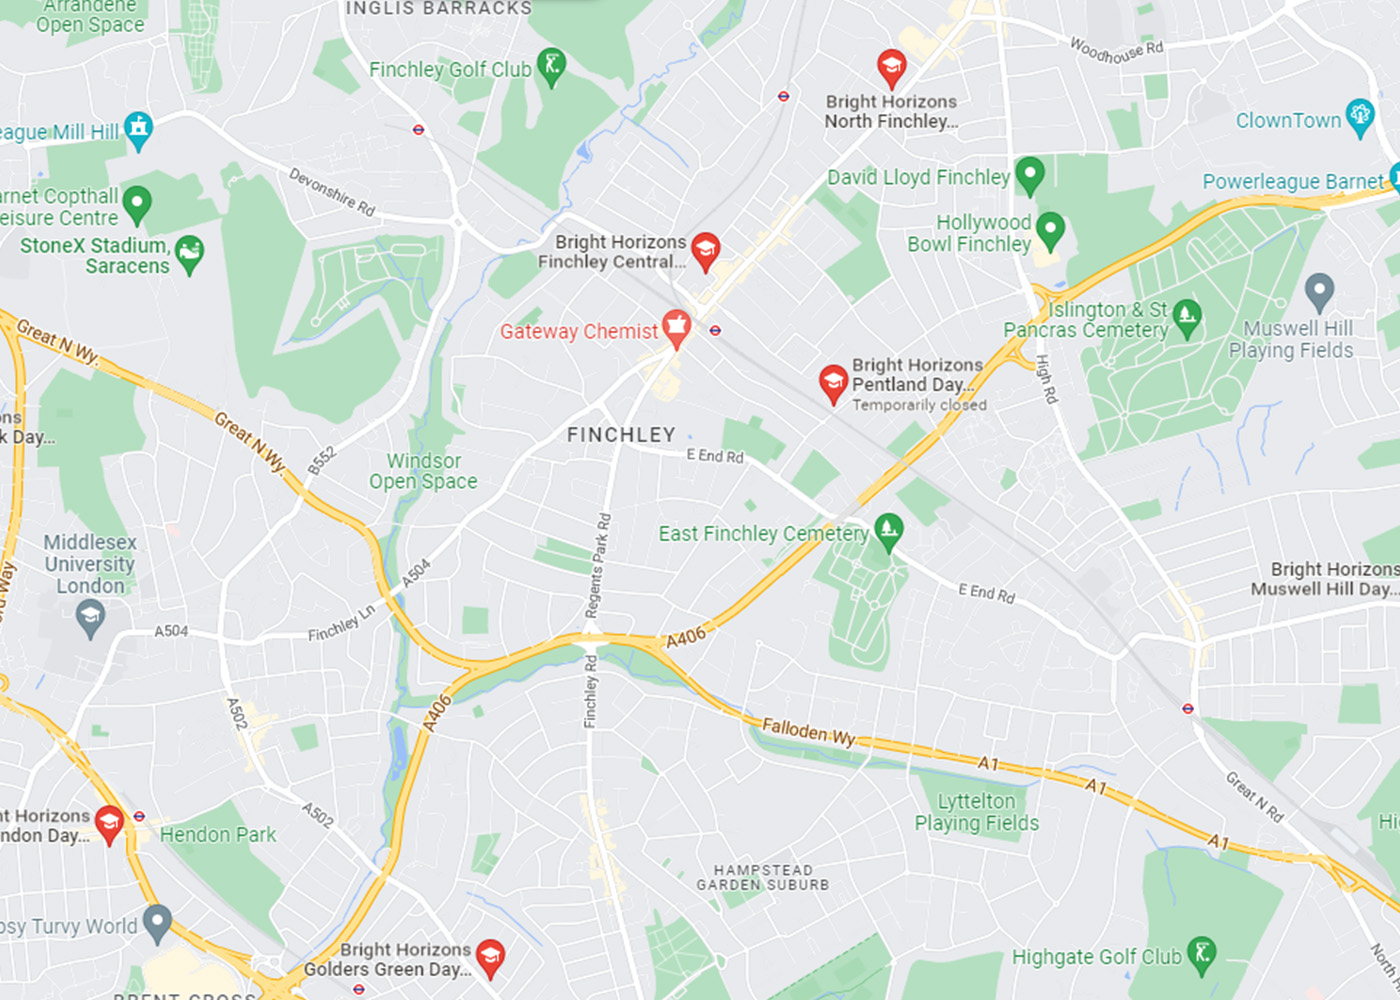 Day Nurseries and Preschools in Finchley and Hendon